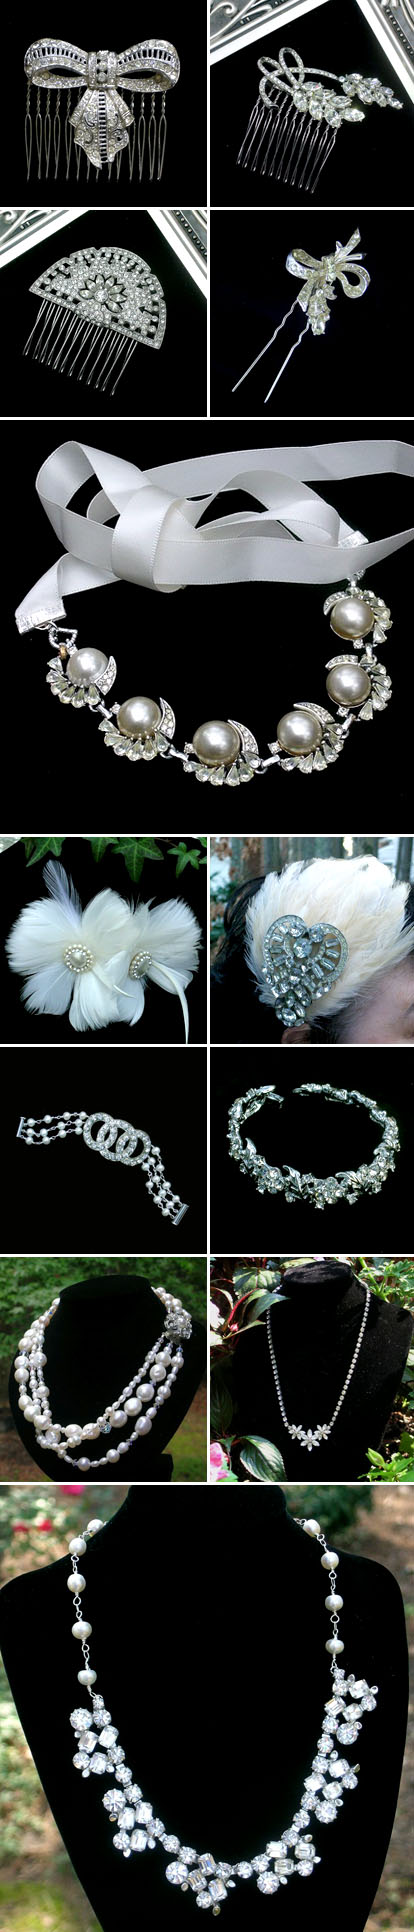 Authentic vintage wedding accessories and jewelry from Bel Canto Designs